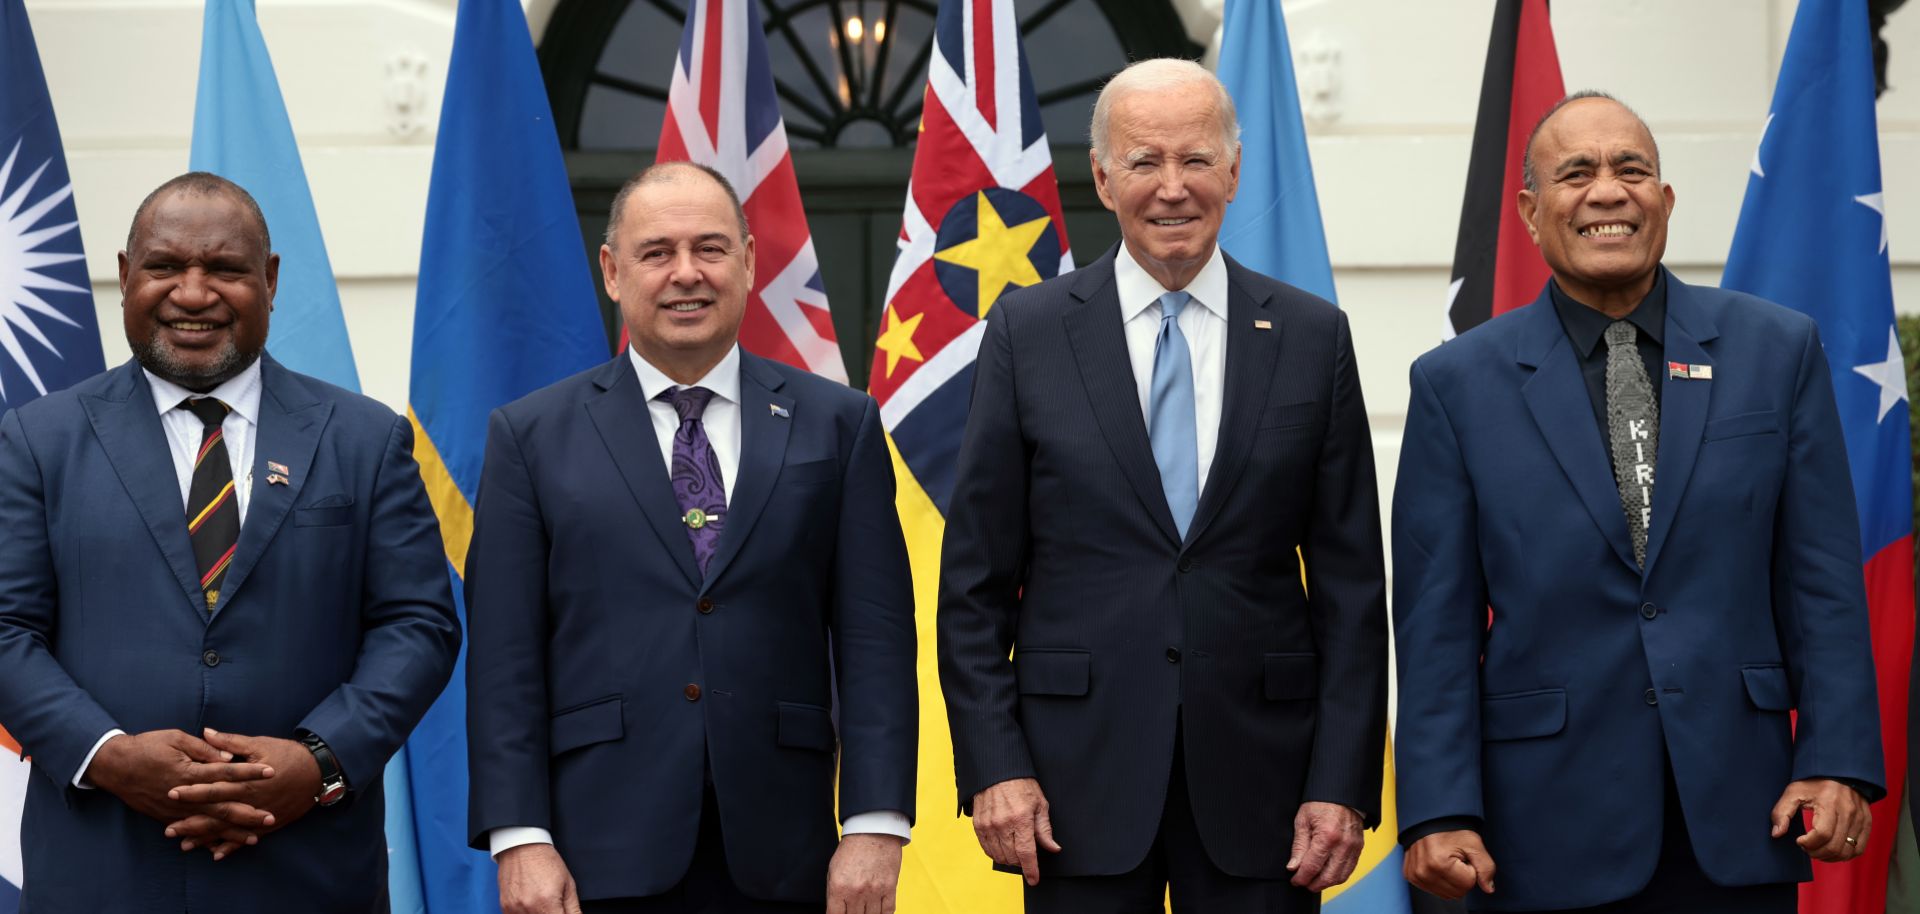 Papua New Guinea's Prime Minister James Marapeand, the Cook Islands' Prime Minister Mark Brown, U.S. President Joe Biden and Kiribati's President Taneti Maamau at the Pacific Islands Forum (PIF) as part of the U.S.-PIF summit at the White House on Sept. 25, 2023, in Washington, D.C.